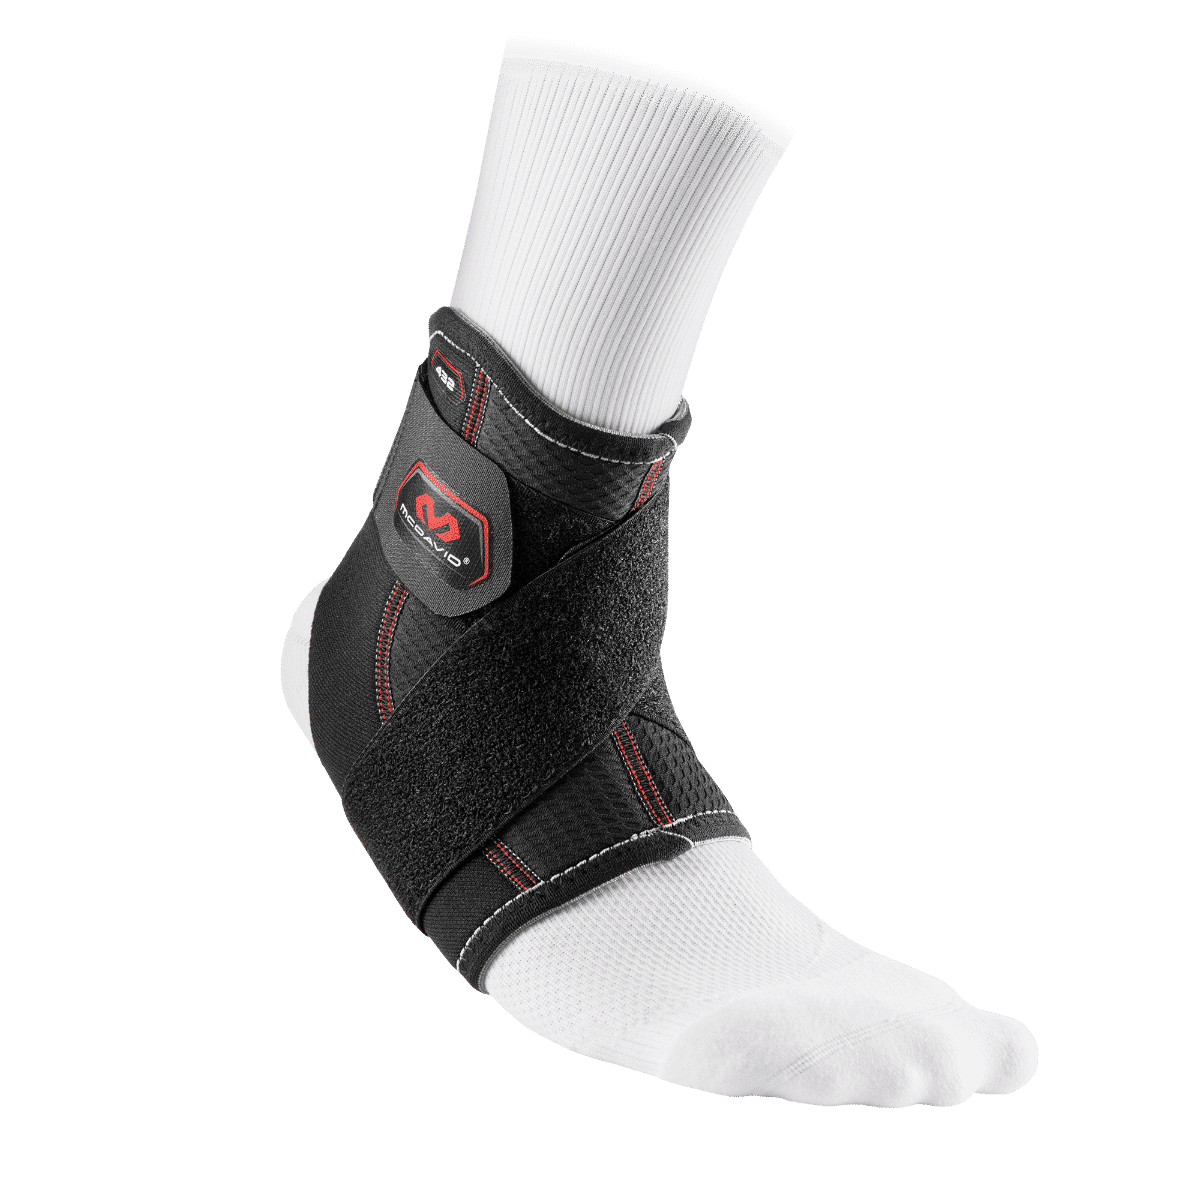 McDavid 432 Ankle Support Brace With Straps